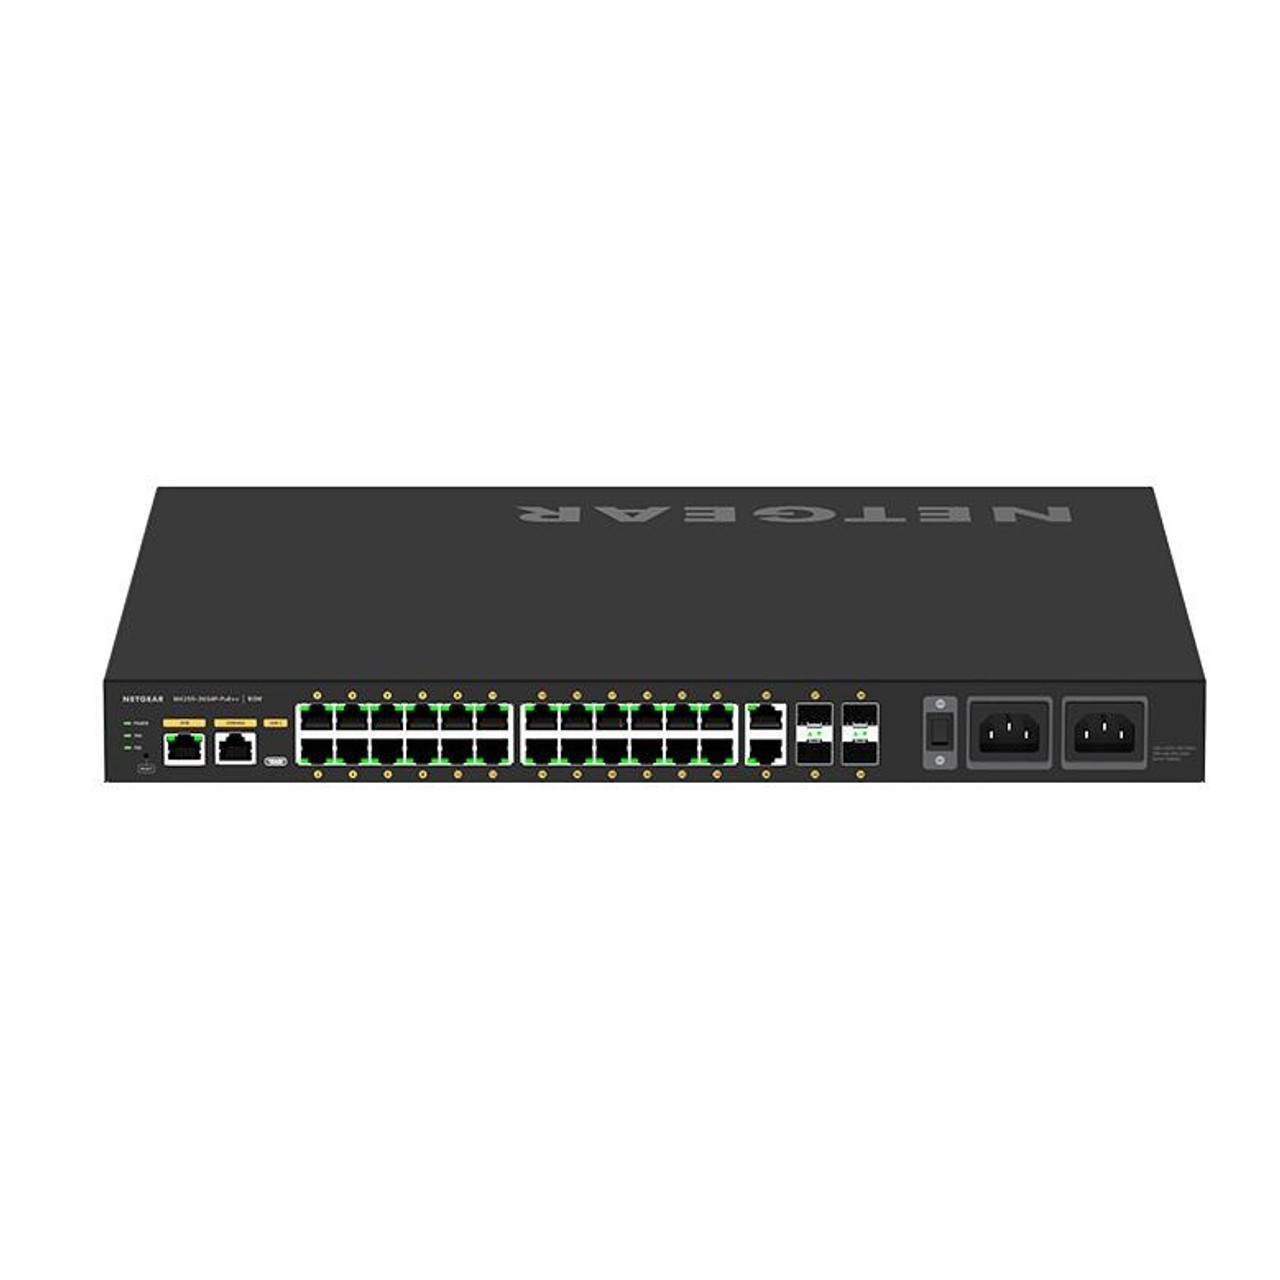 Netgear AV Line M4250-26G4F-PoE 24x1G Ultra90 PoE 802.3bt 1440W Managed Switch with 2x1G and 4xSFP